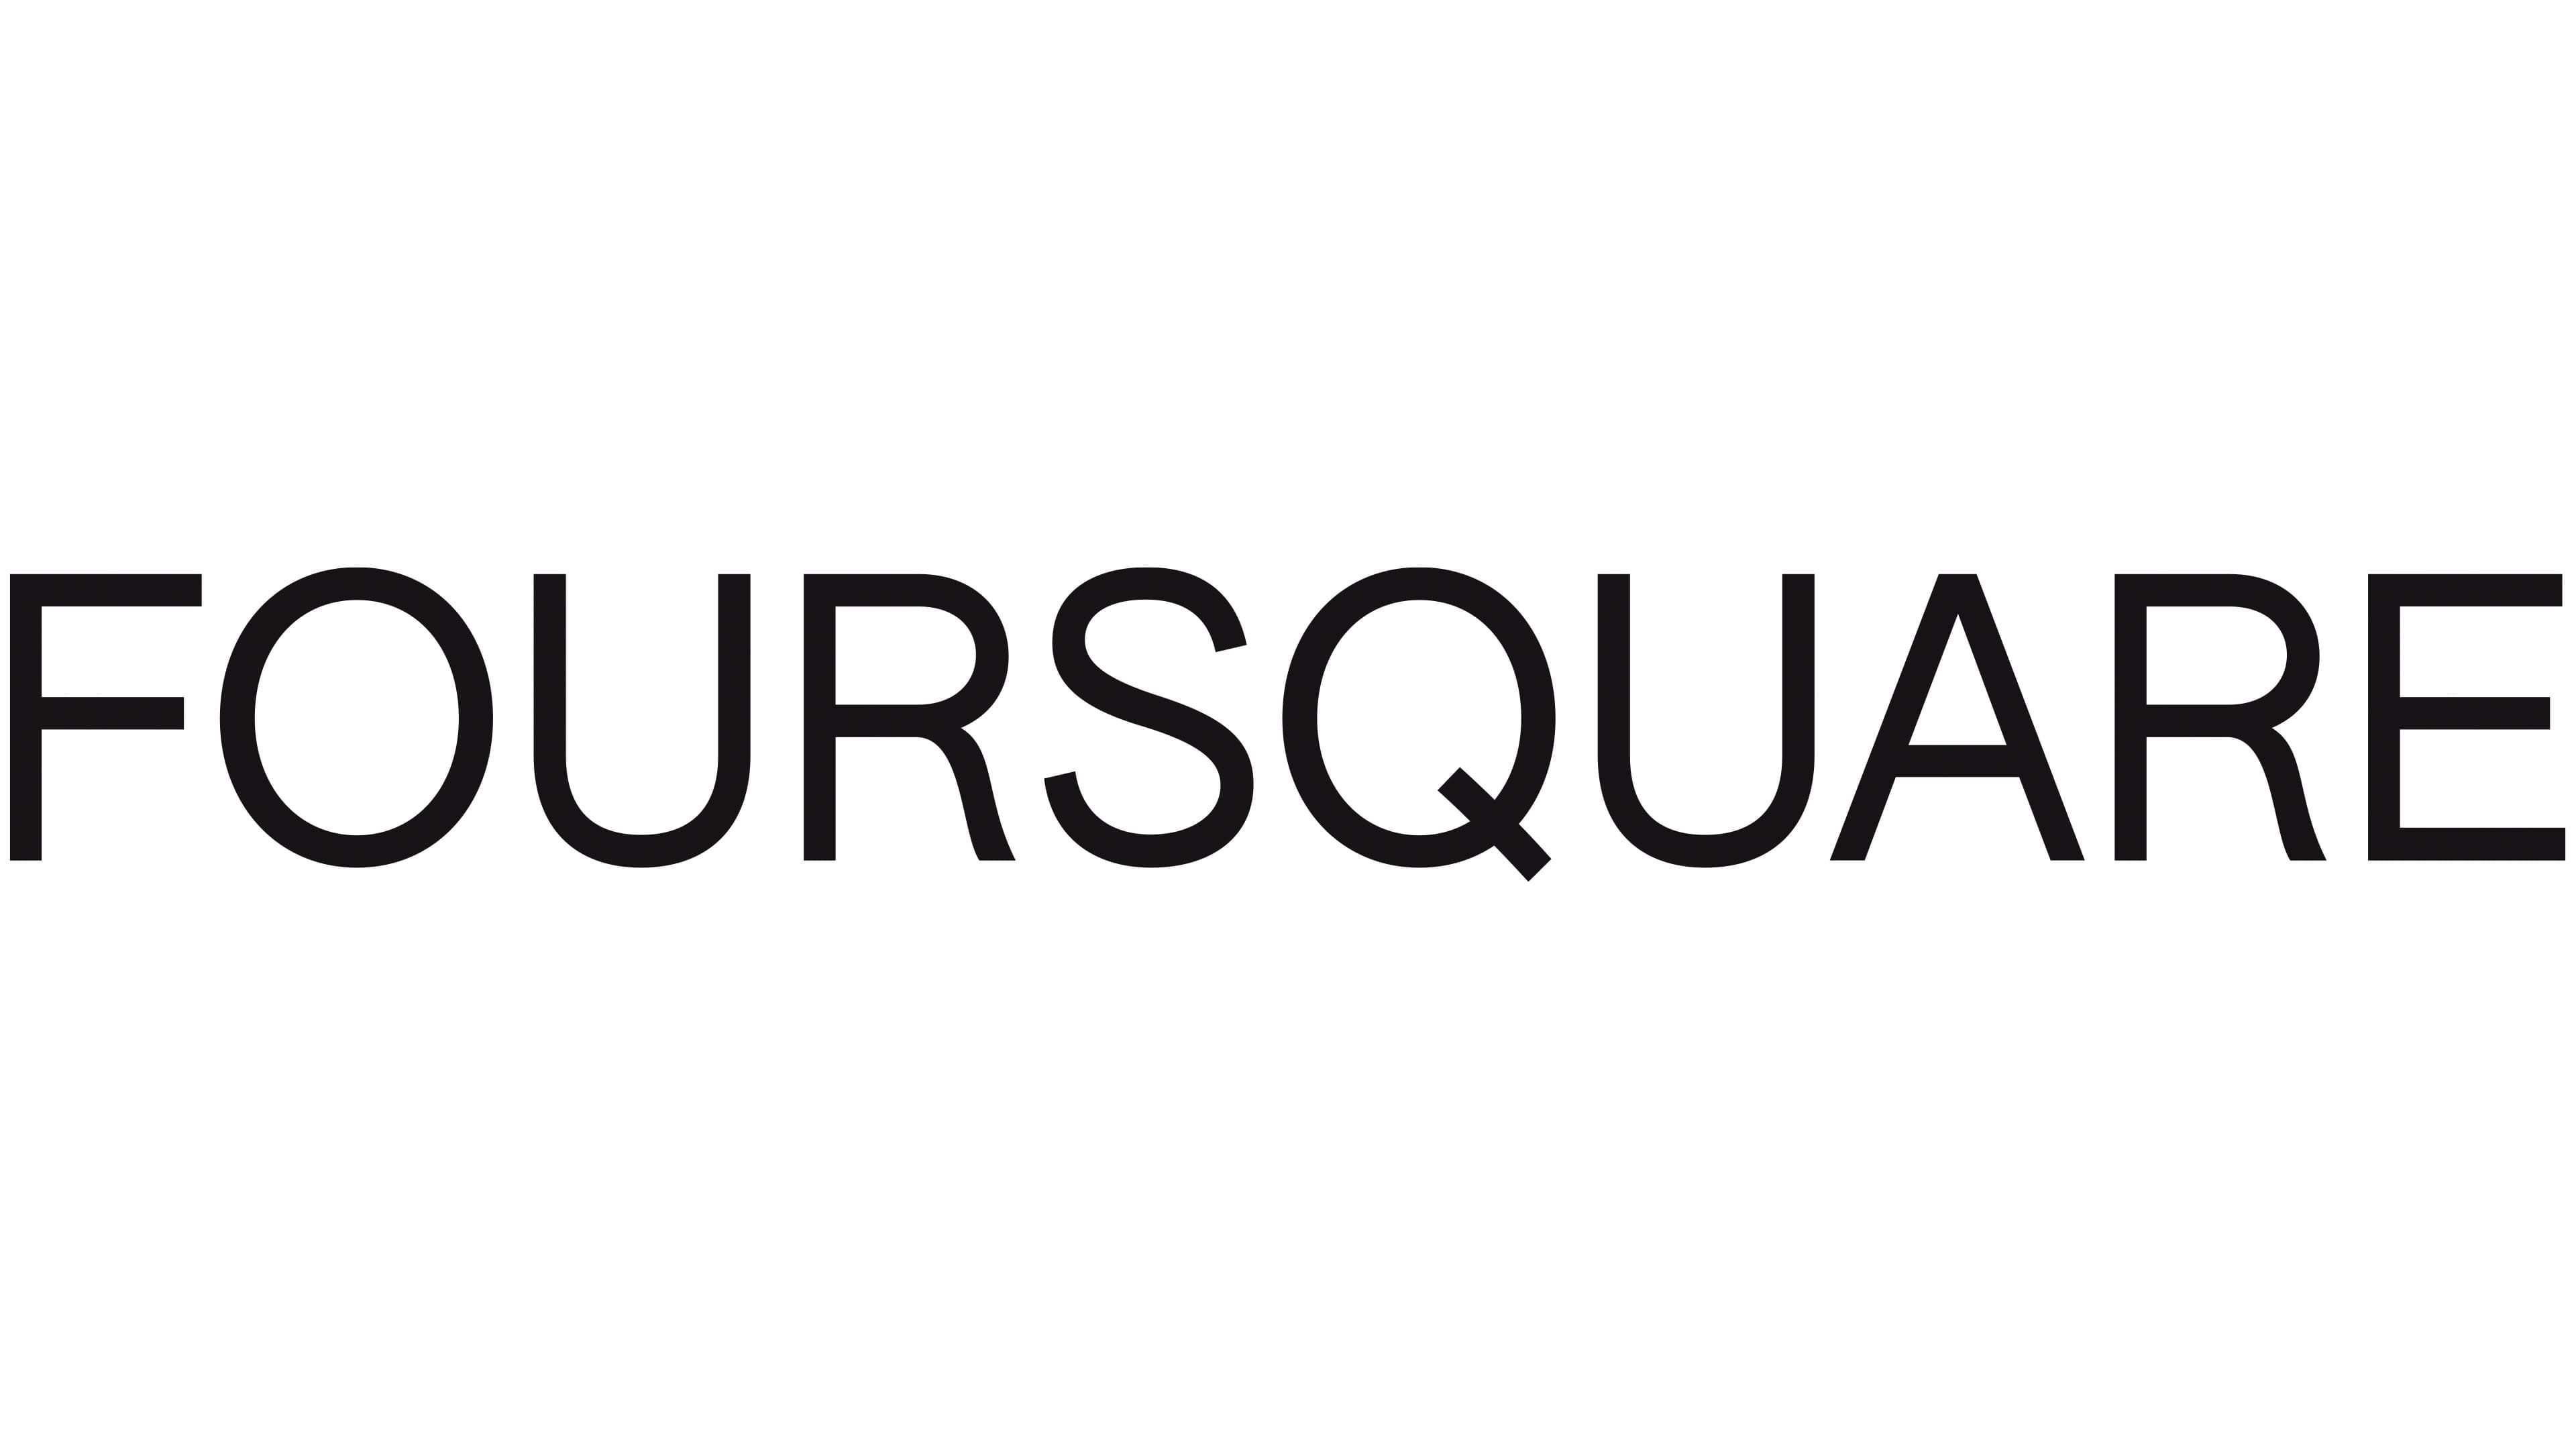 New App, New Logo for Foursquare - Corporate Eye